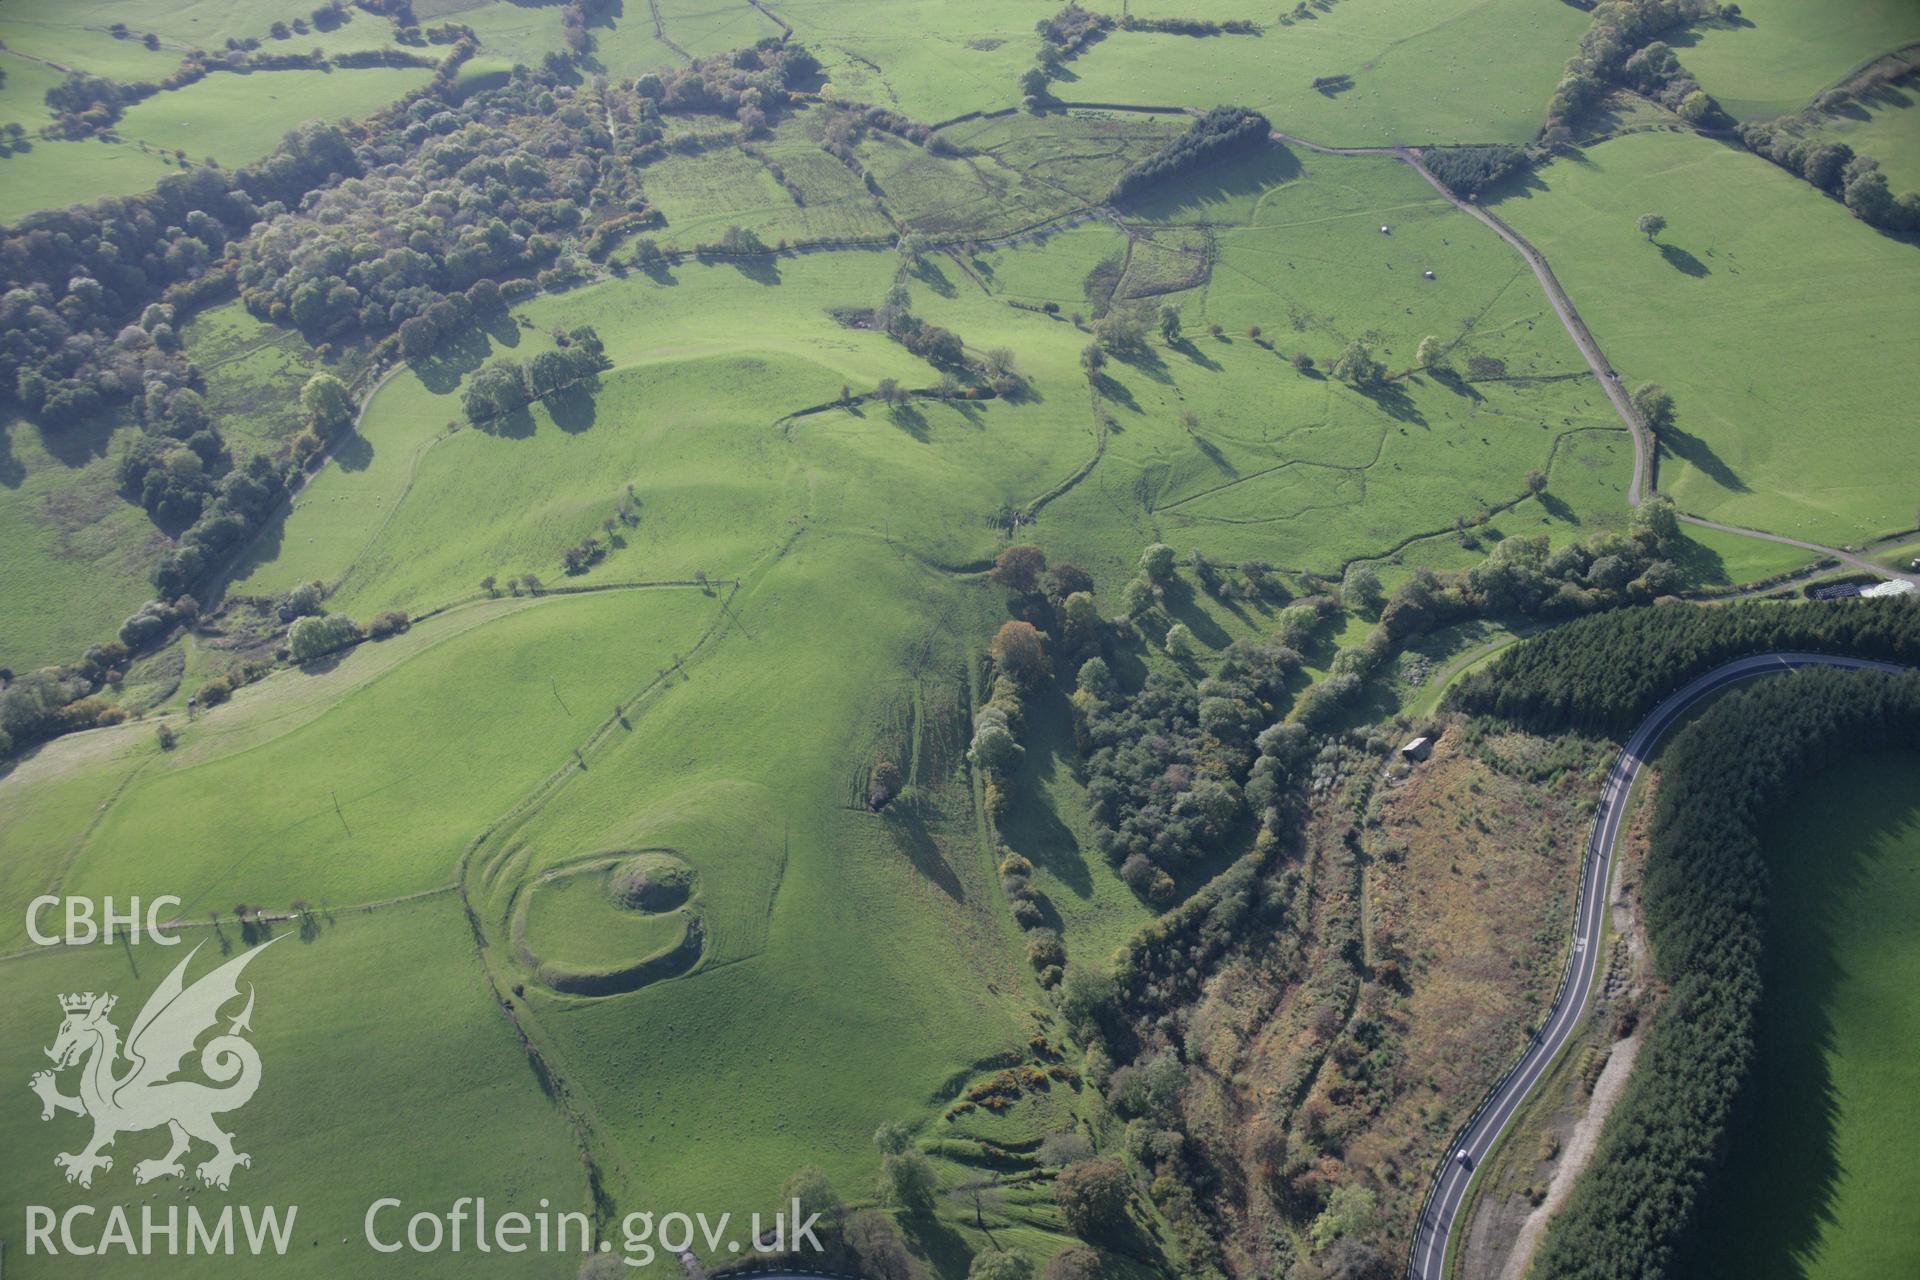 RCAHMW colour oblique aerial photograph of Castell Crugerydd from the north-east. Taken on 13 October 2005 by Toby Driver